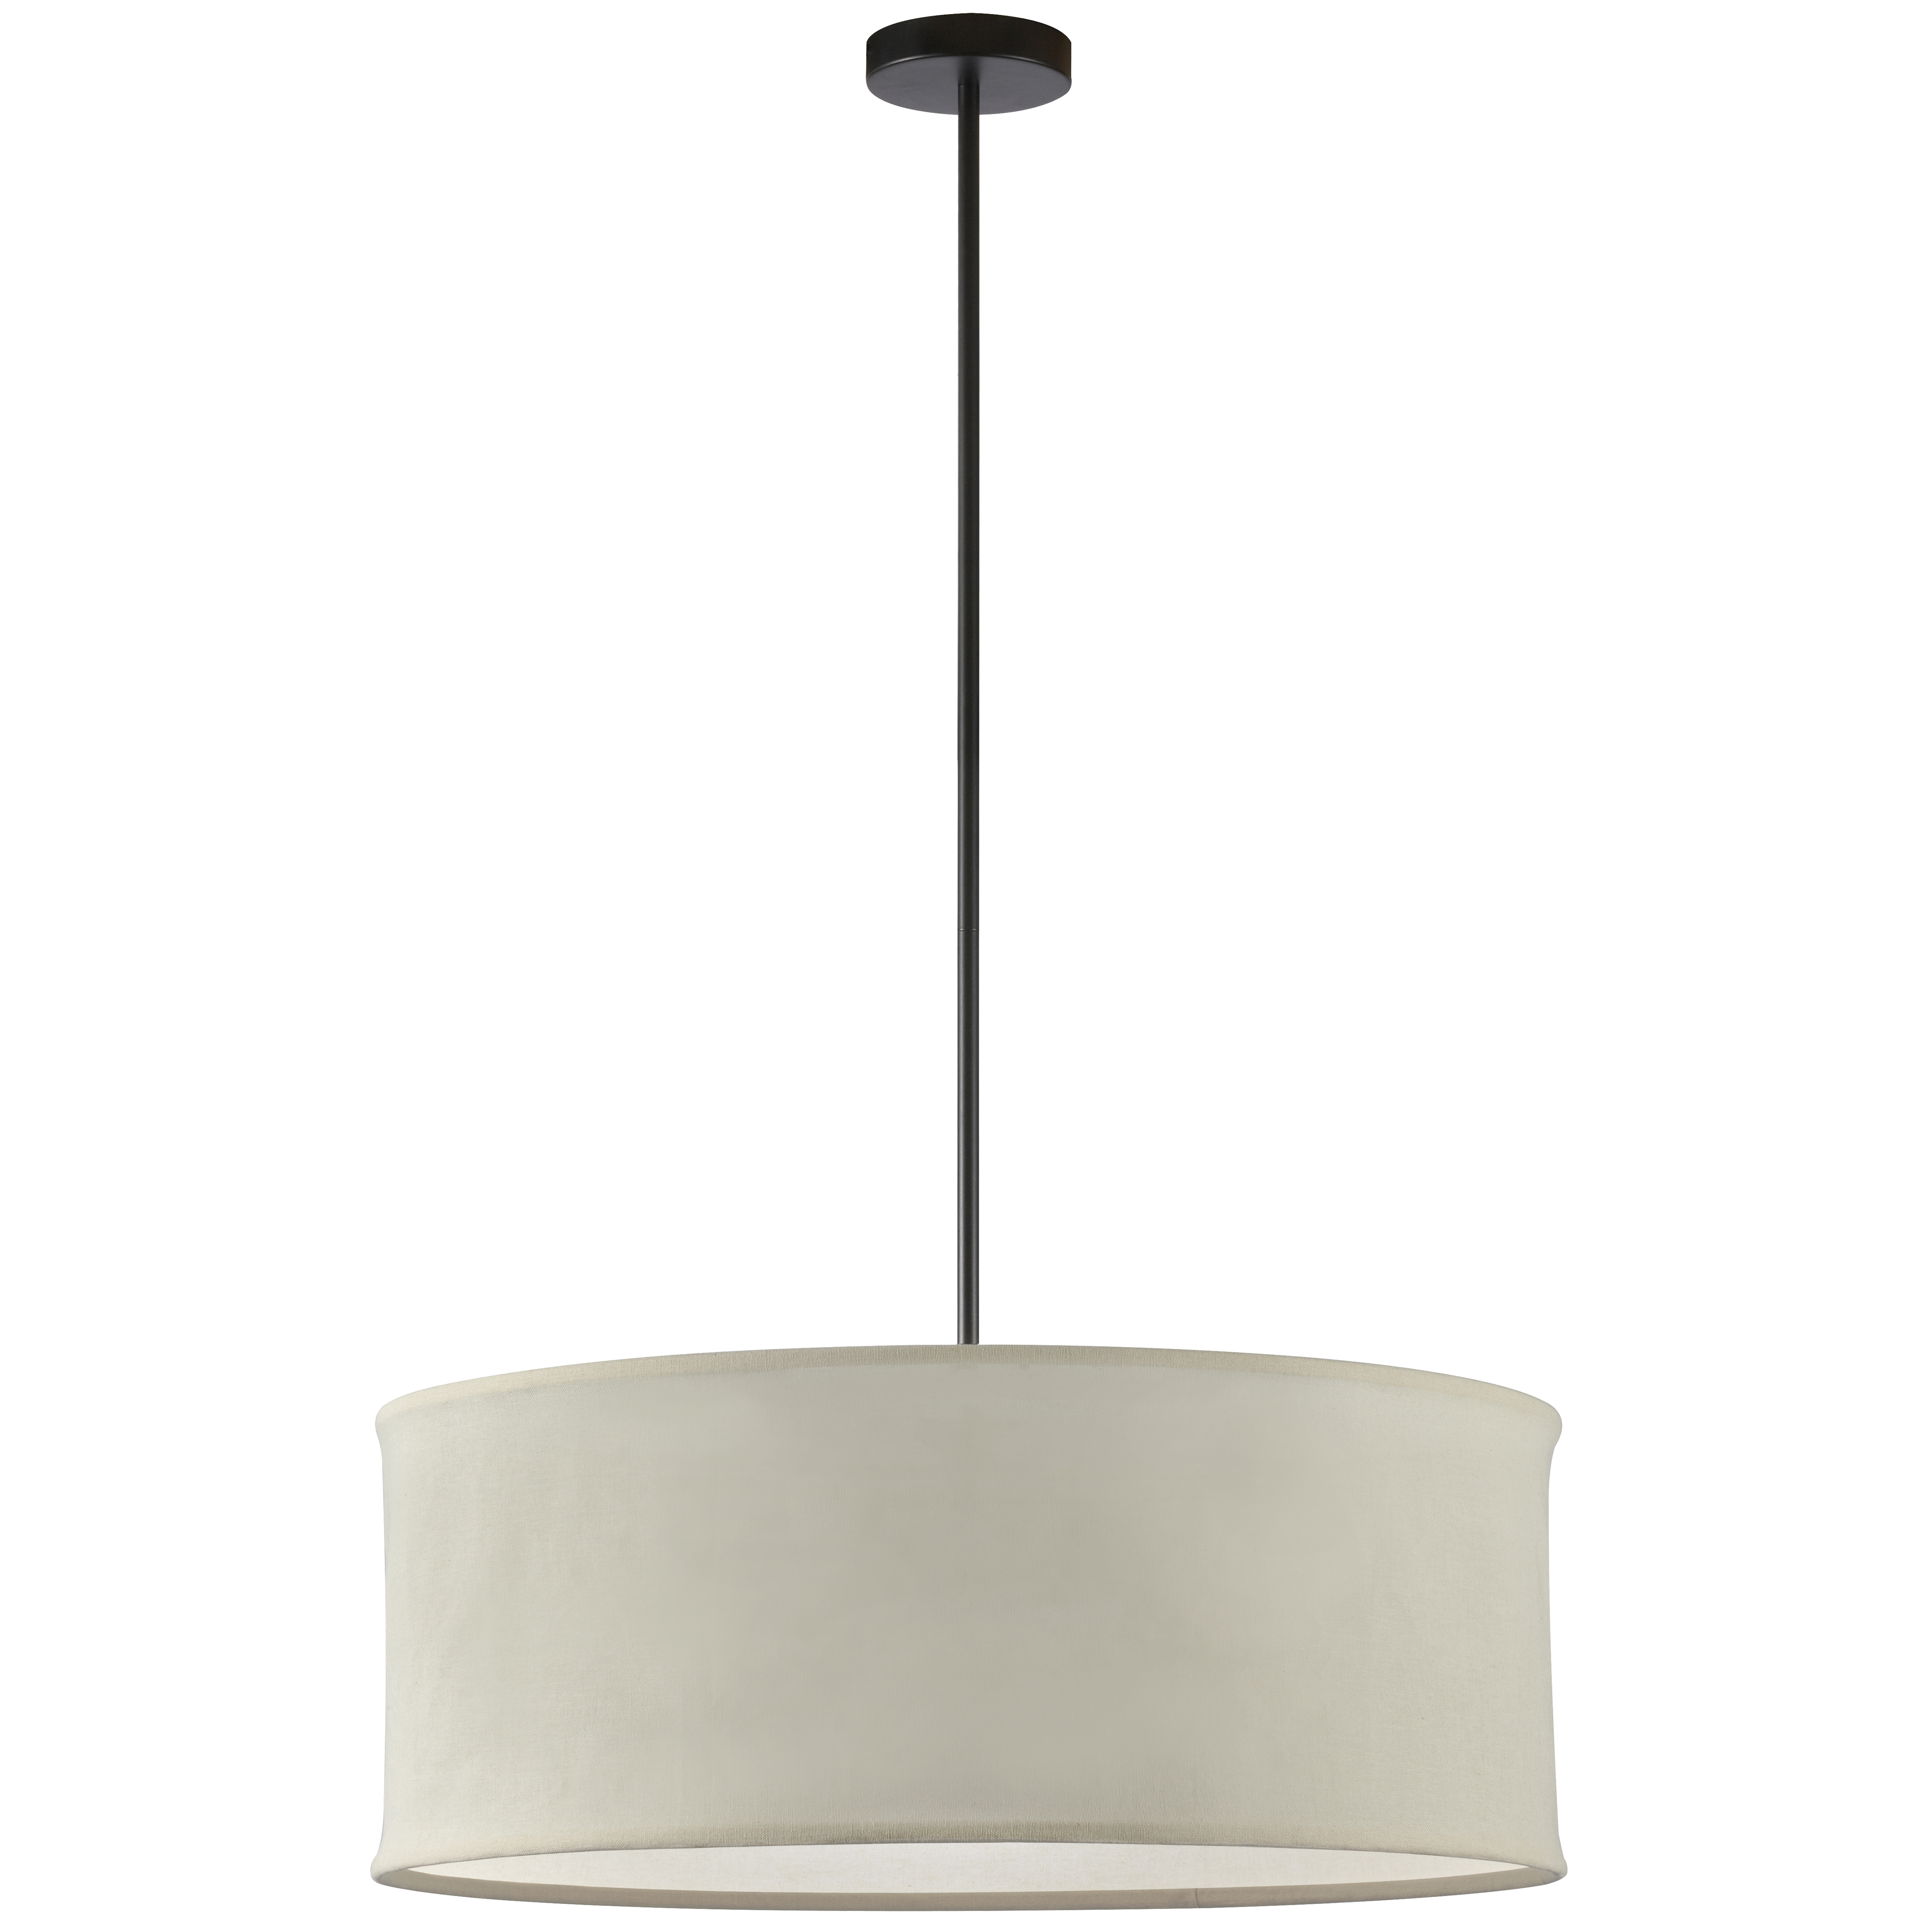 The classic drum gets a stylish update in the Philis family of lighting. With options in elegant neutral colors, Philis lighting has a timeless quality and appeal. The frame in stylish black features a straight drop to a fabric drum shade in your choice of neutrals with a slim horizontal profile. What sets Philis lighting apart is a beveled edge at the top and bottom of the drum, with a slightly tapered silhouette. It gives the Philis family of lighting an ageless appeal that will easily blend into virtually any décor scheme.